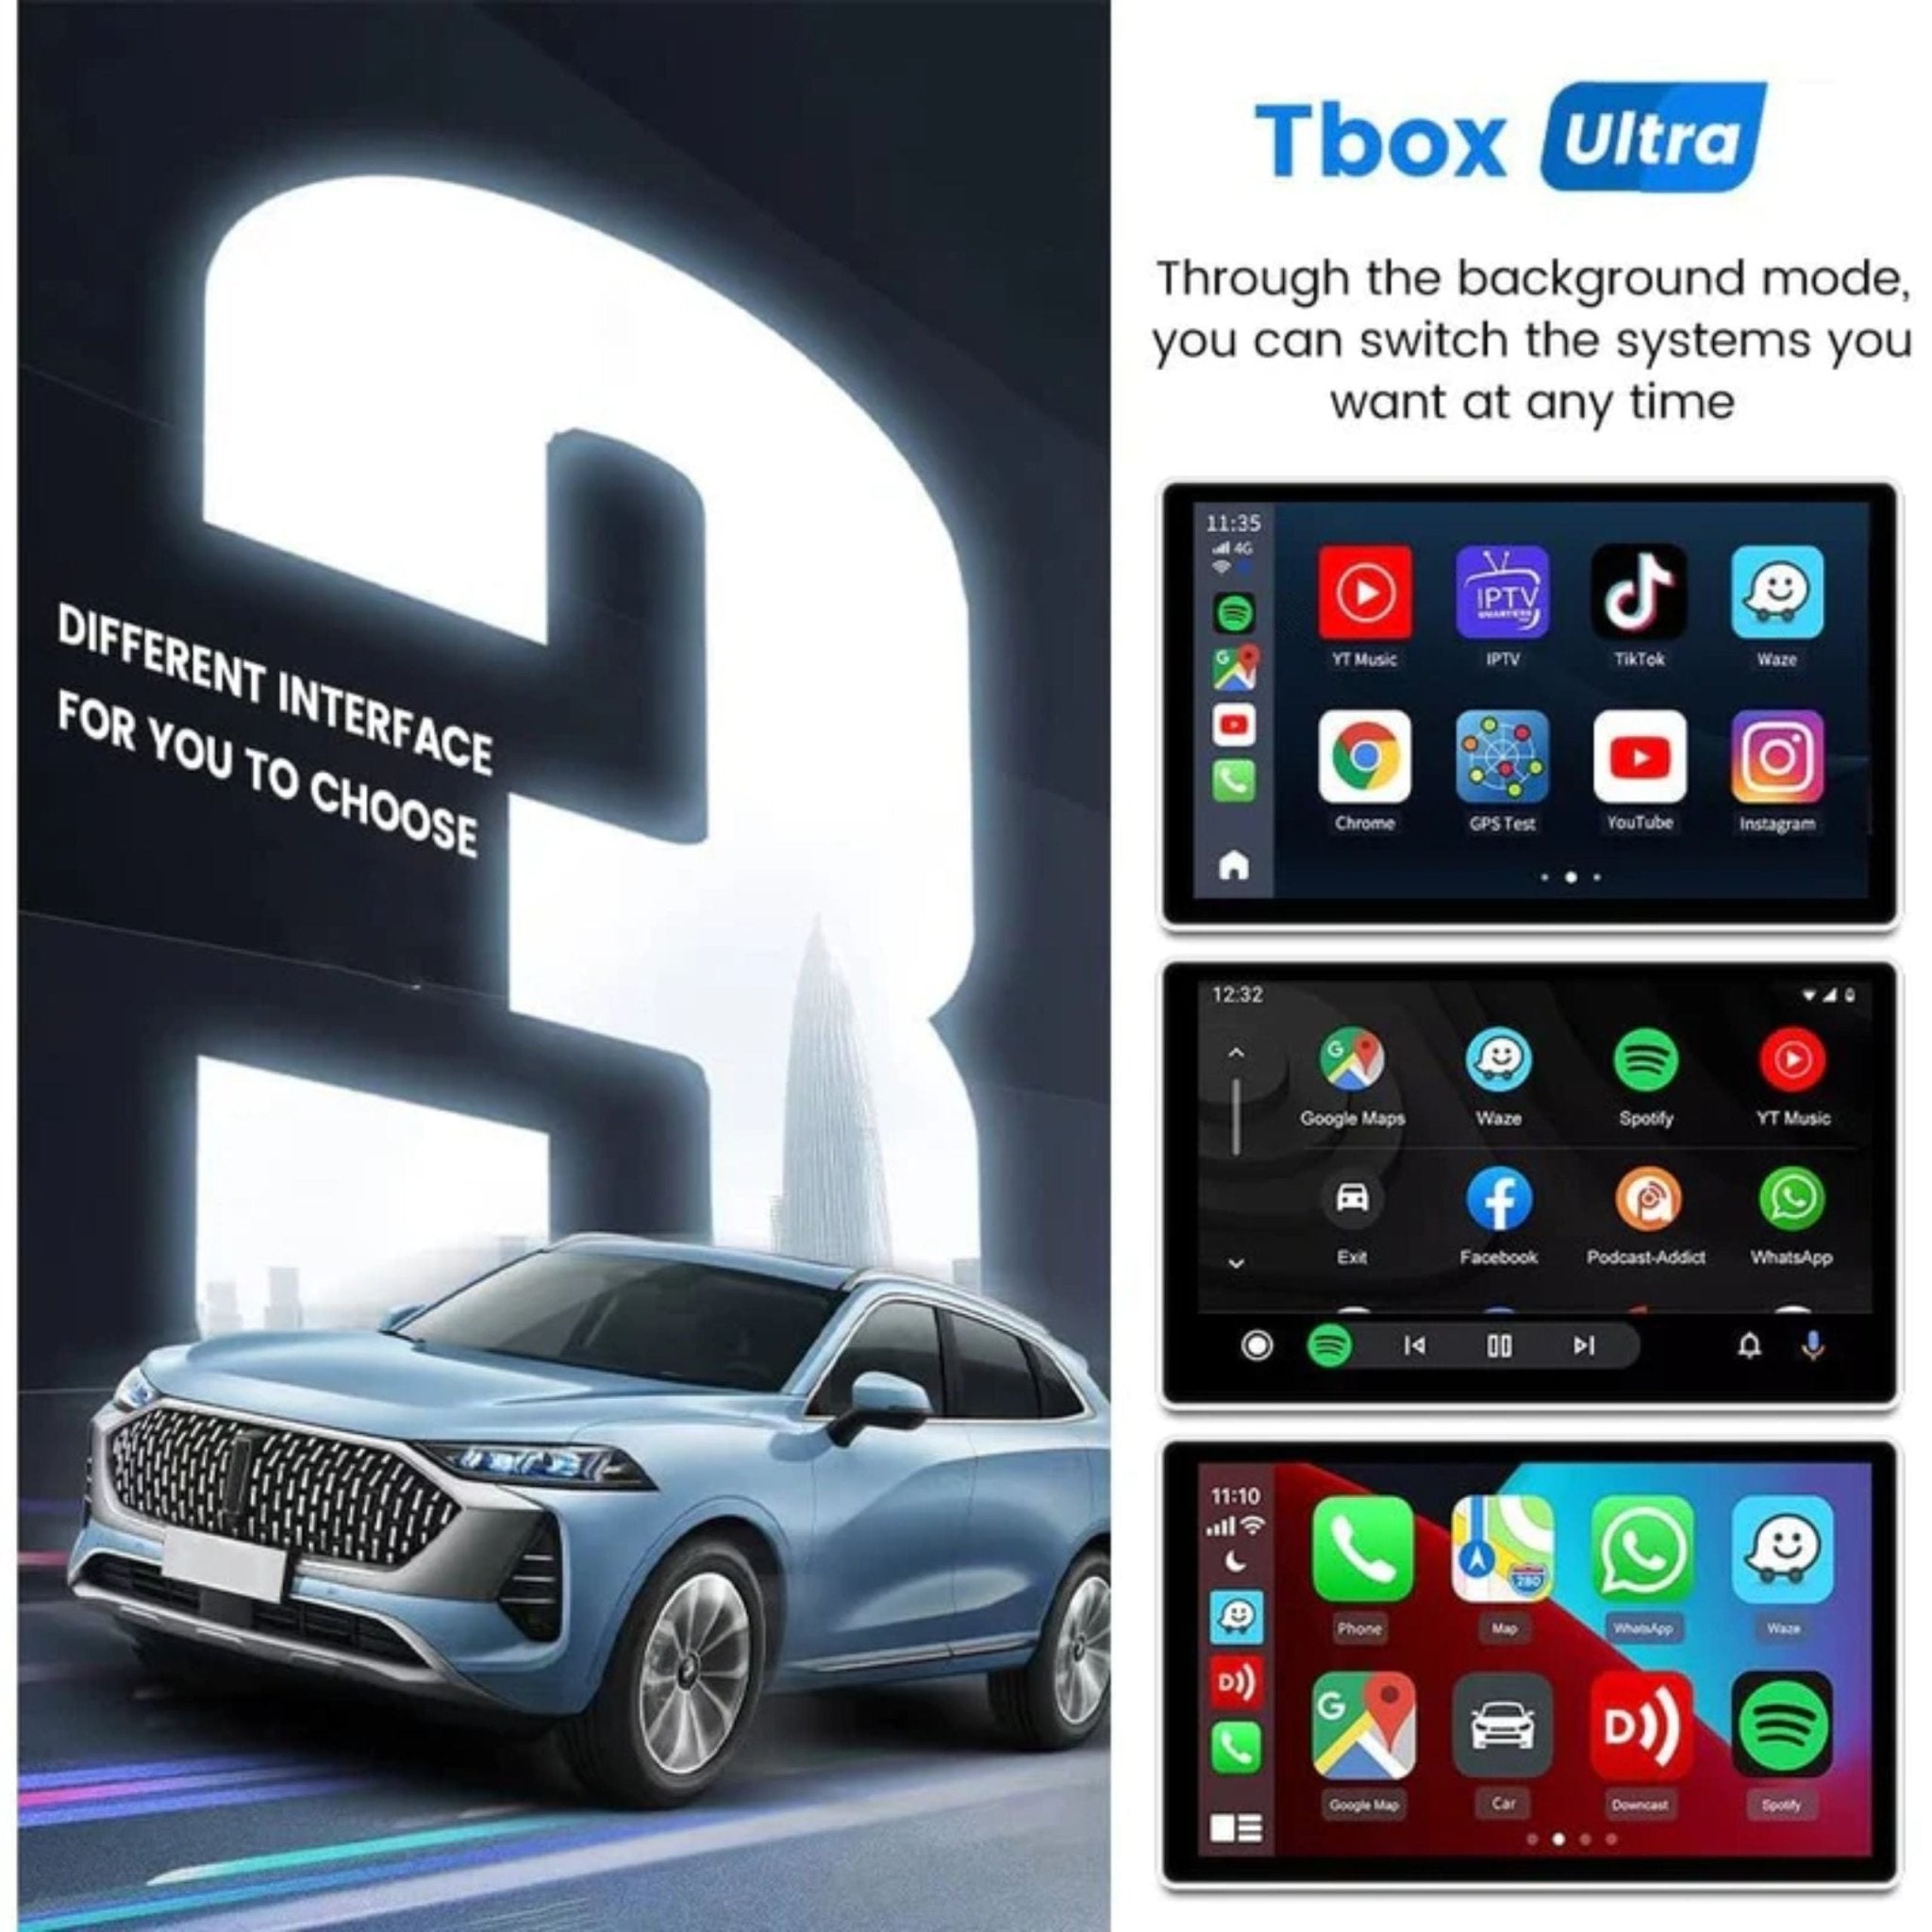 Car Android Box Full Android System 4G 8GB 128GB - Dark Blue